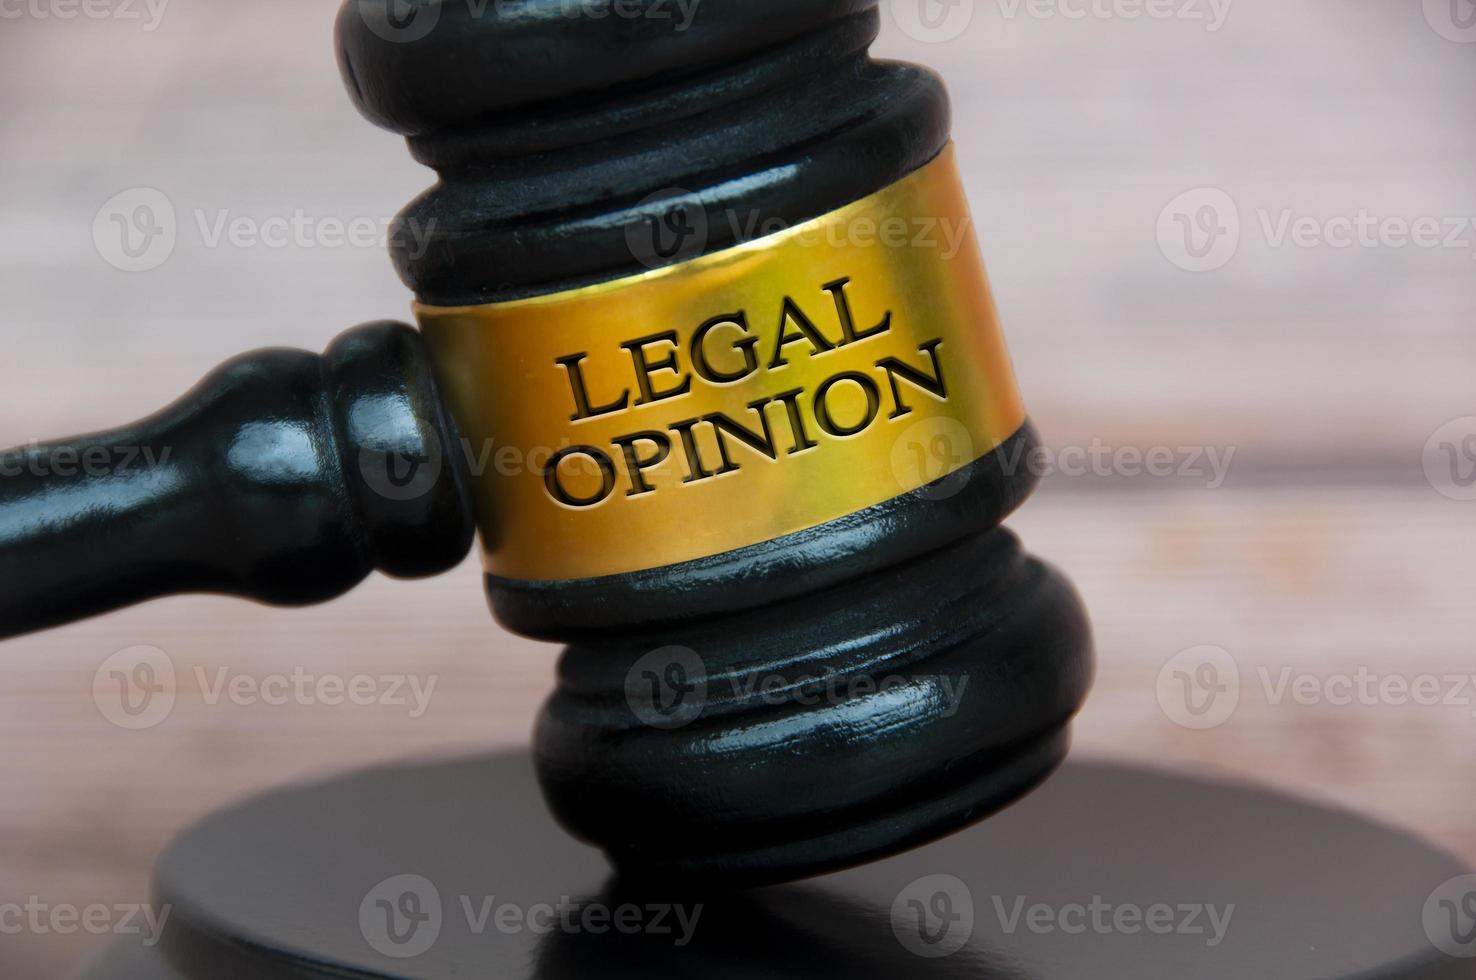 Legal opinion text engraved on lawyer gavel with blurred wooden background. Legal and law concept photo